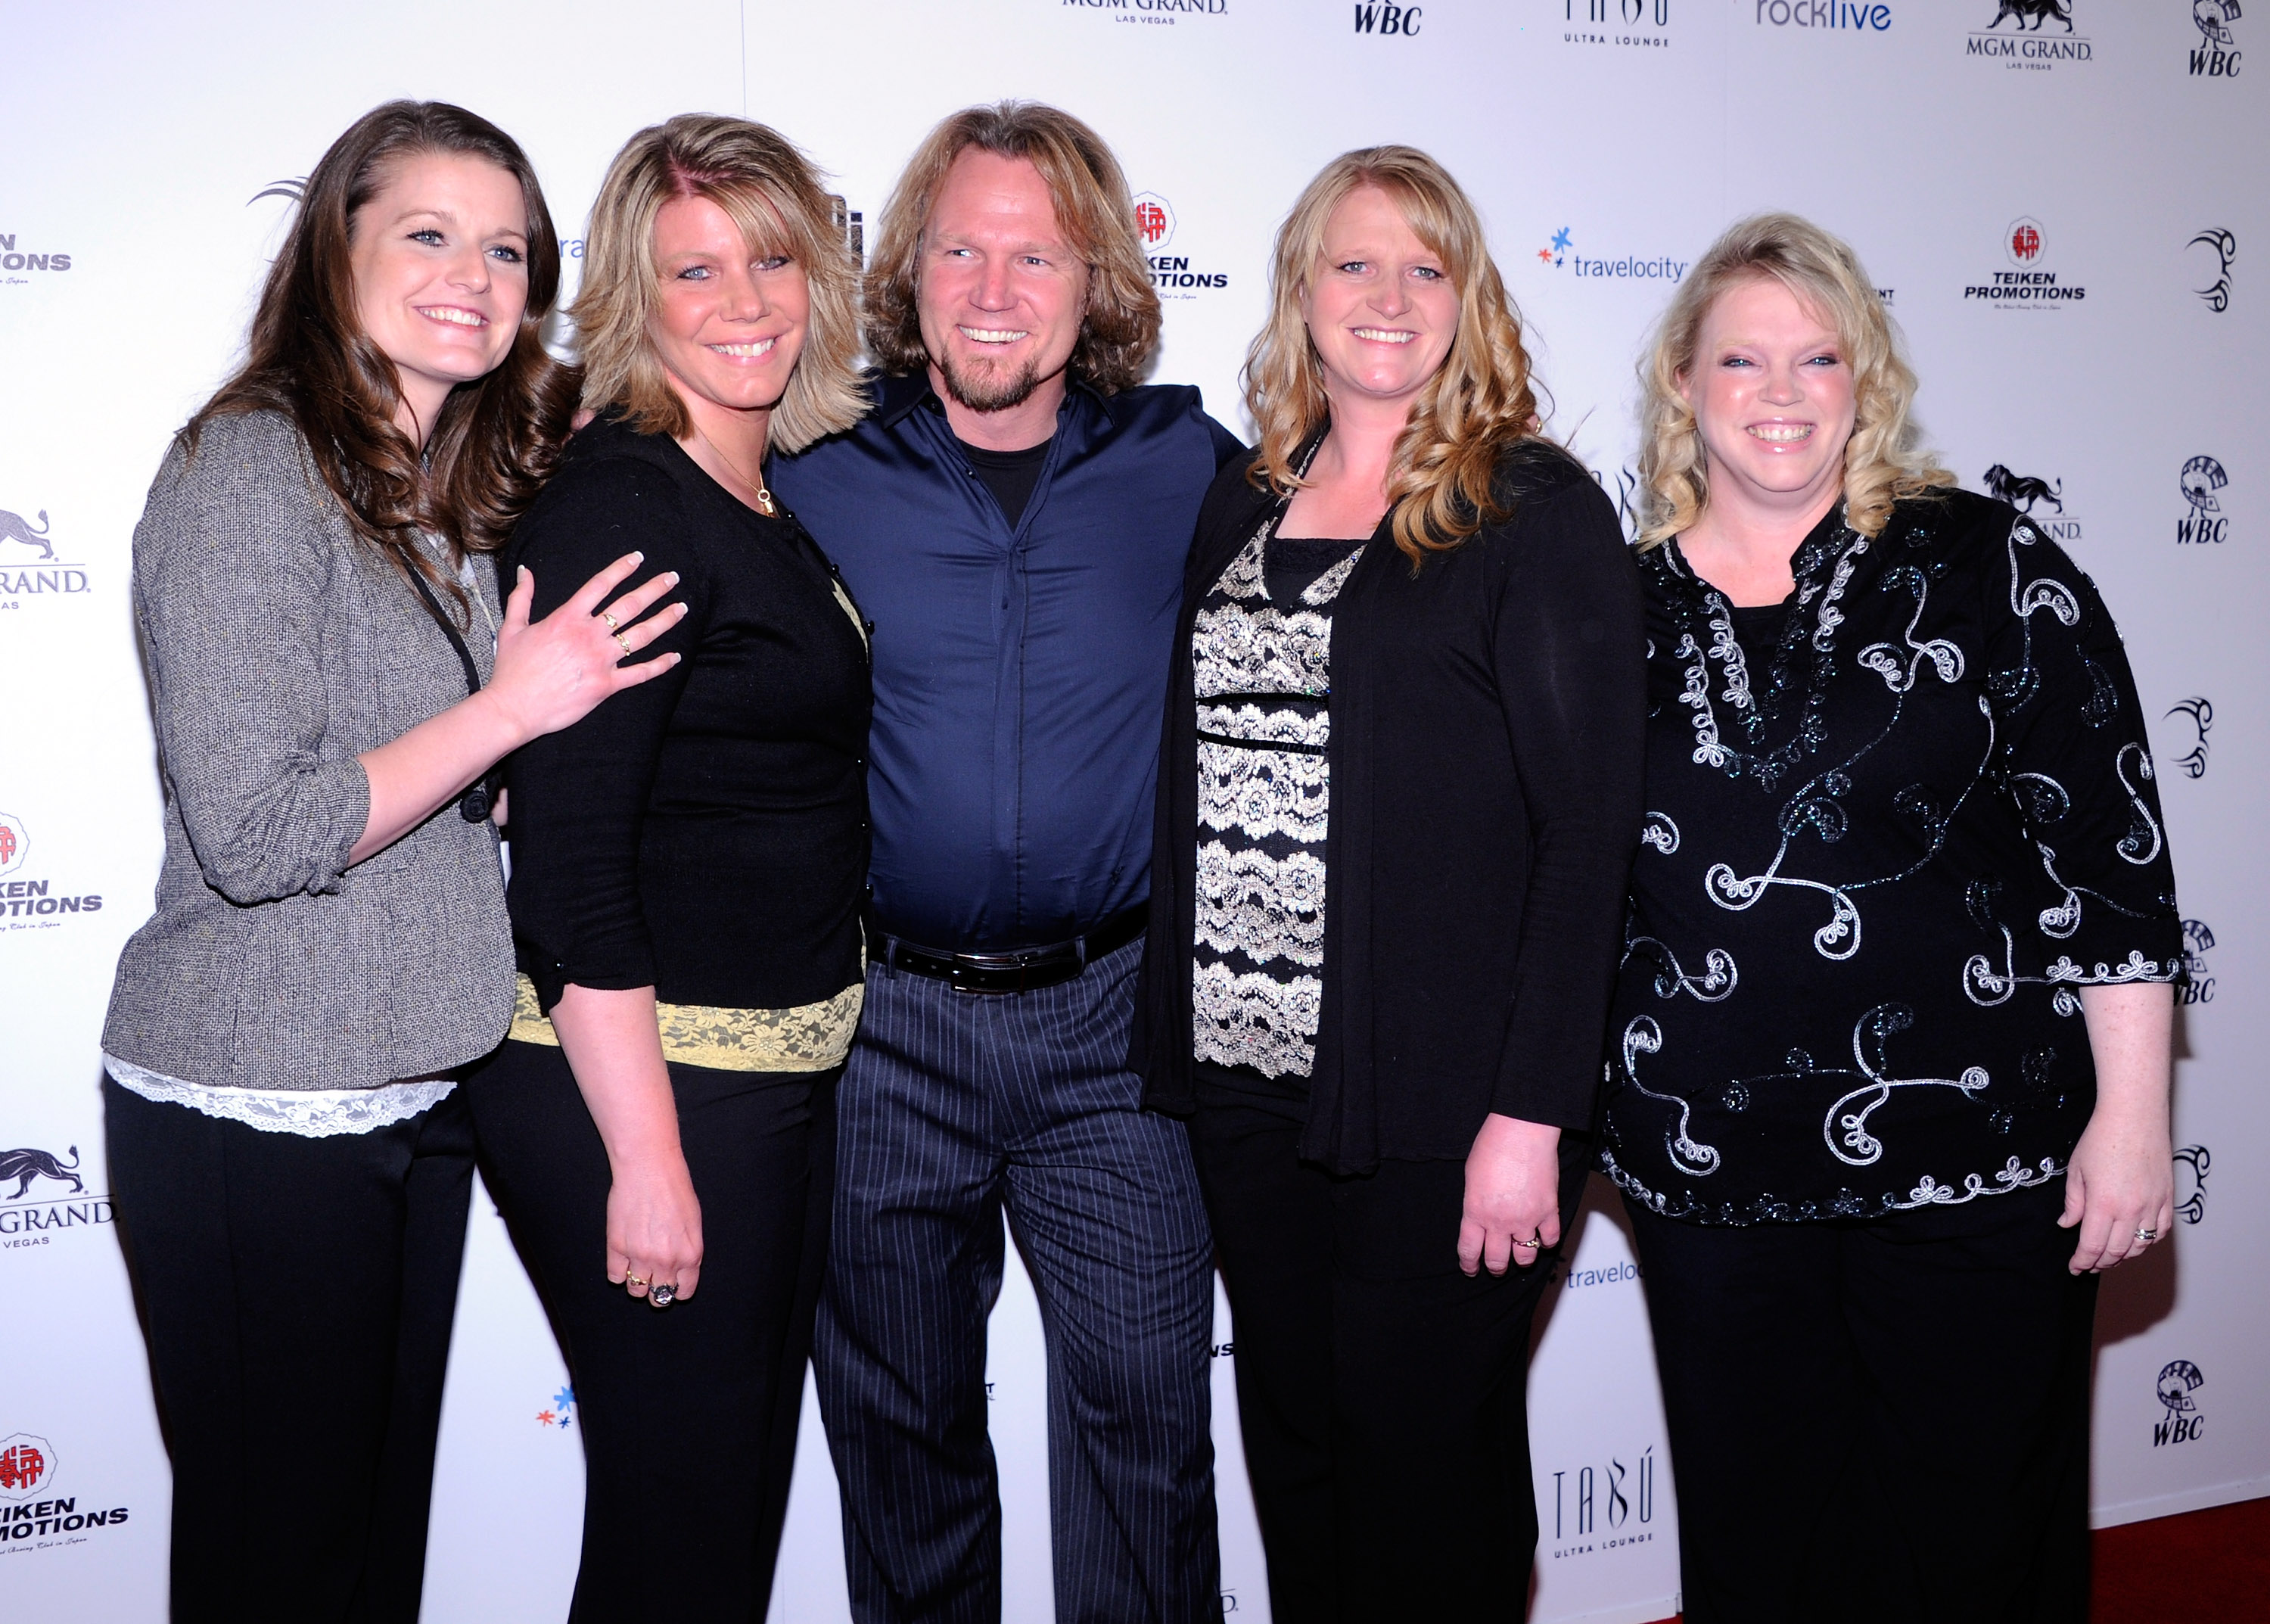 'Sister Wives' stars, Robyn Brown, Meri Brown, Kody Brown, Christine Brown and Janelle Brown arrive at 'Mike Tyson: Undisputed Truth- Live on Stage'